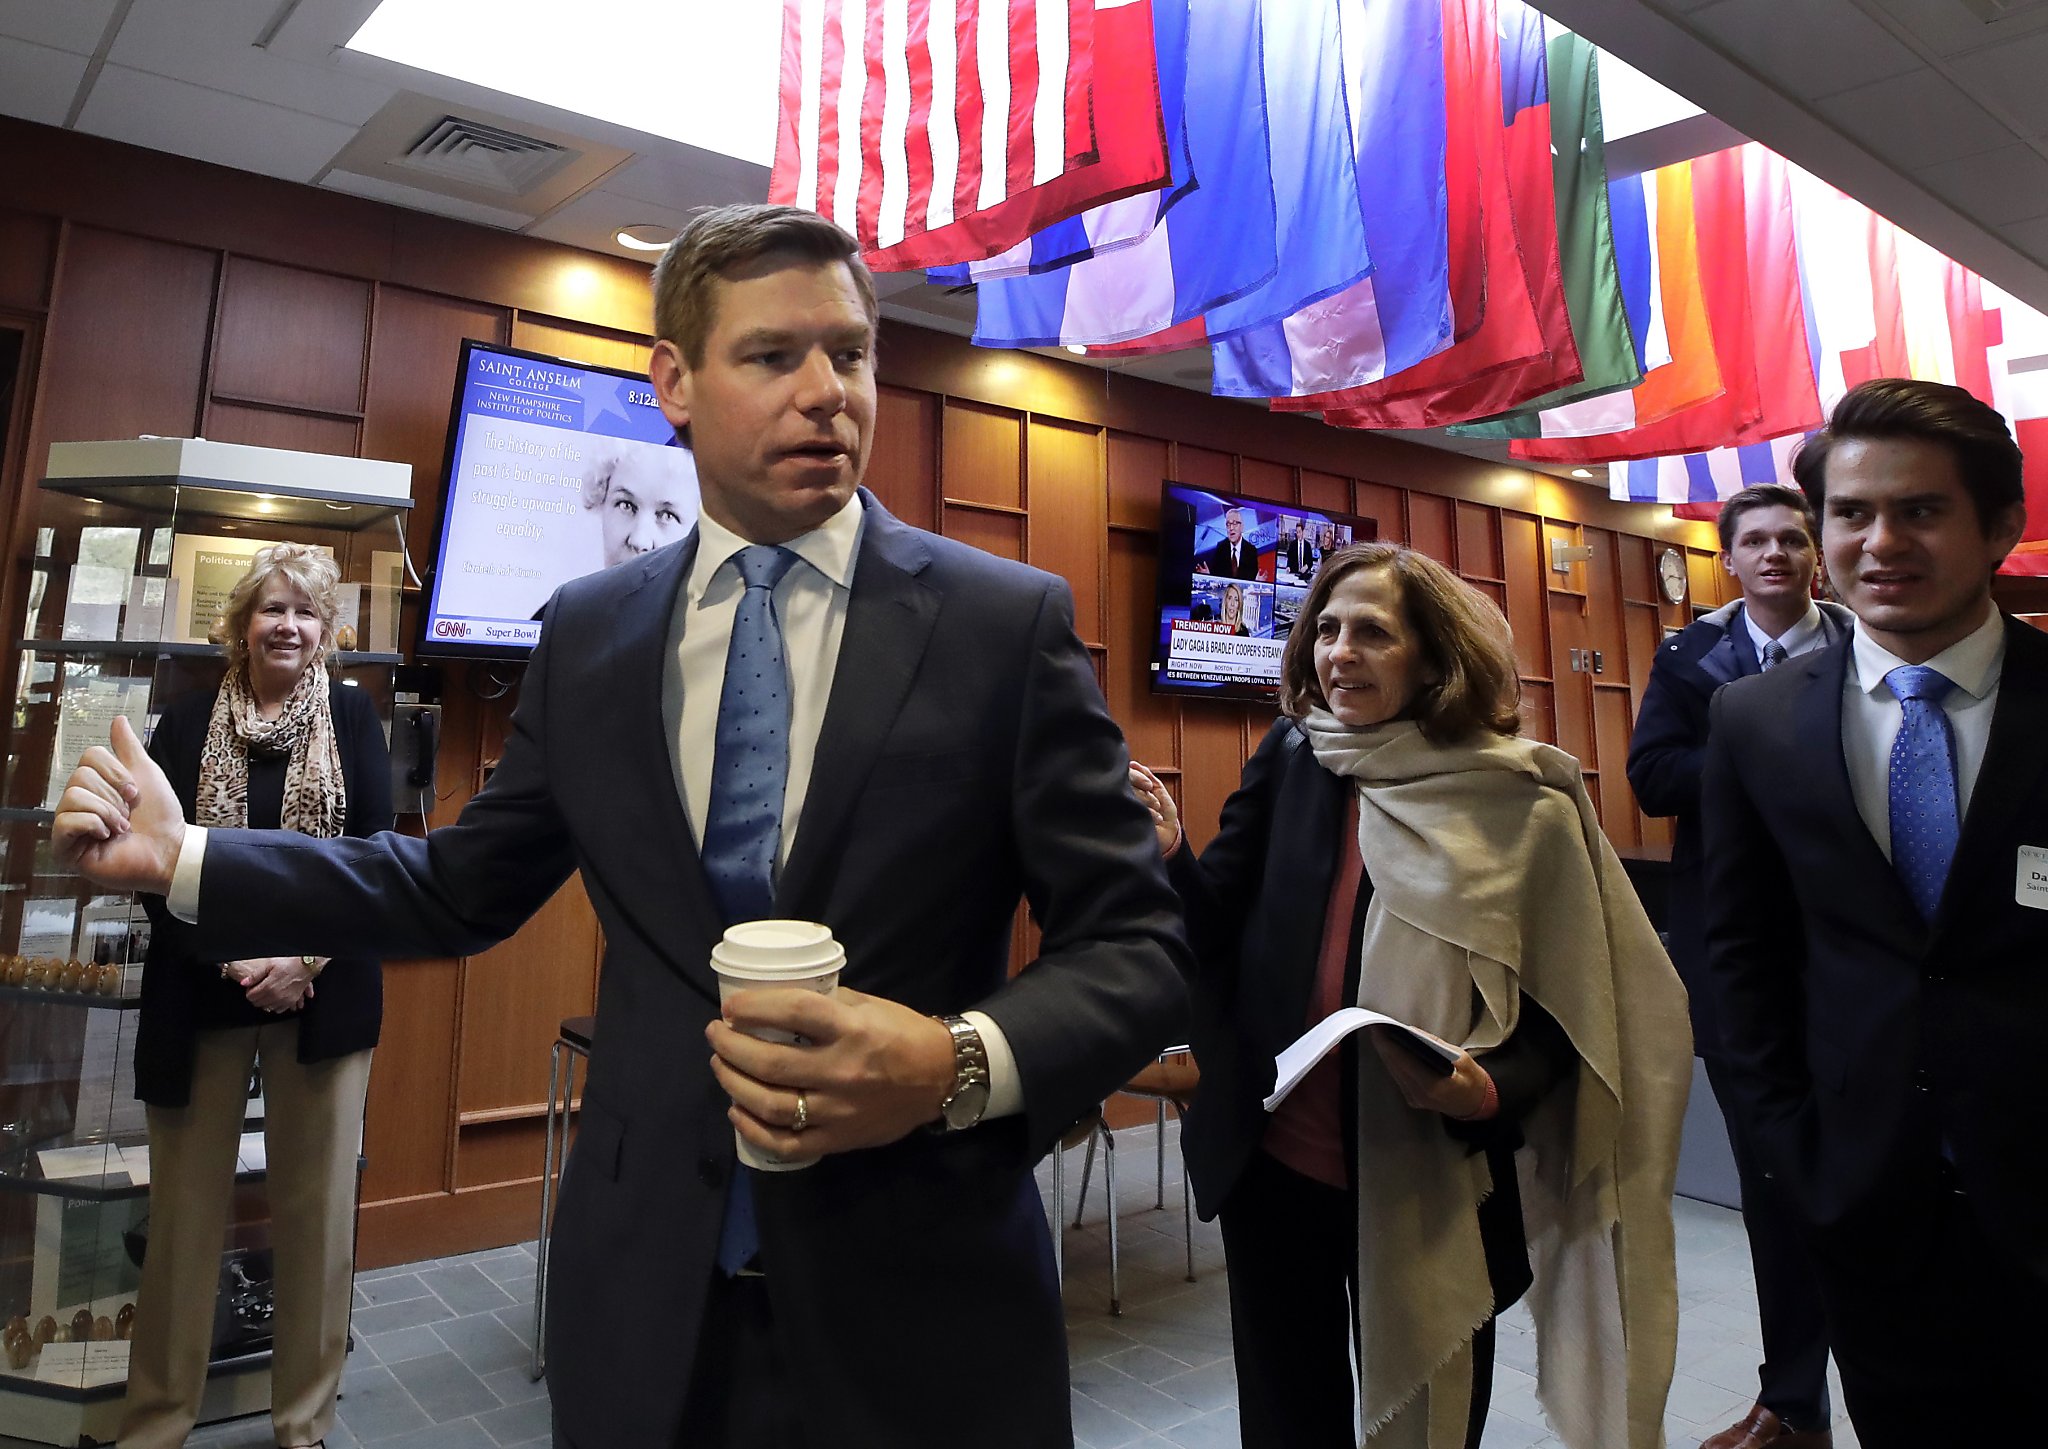 Rep. Eric Swalwell will give up East Bay seat if he runs for president - SFChronicle.com2048 x 1449